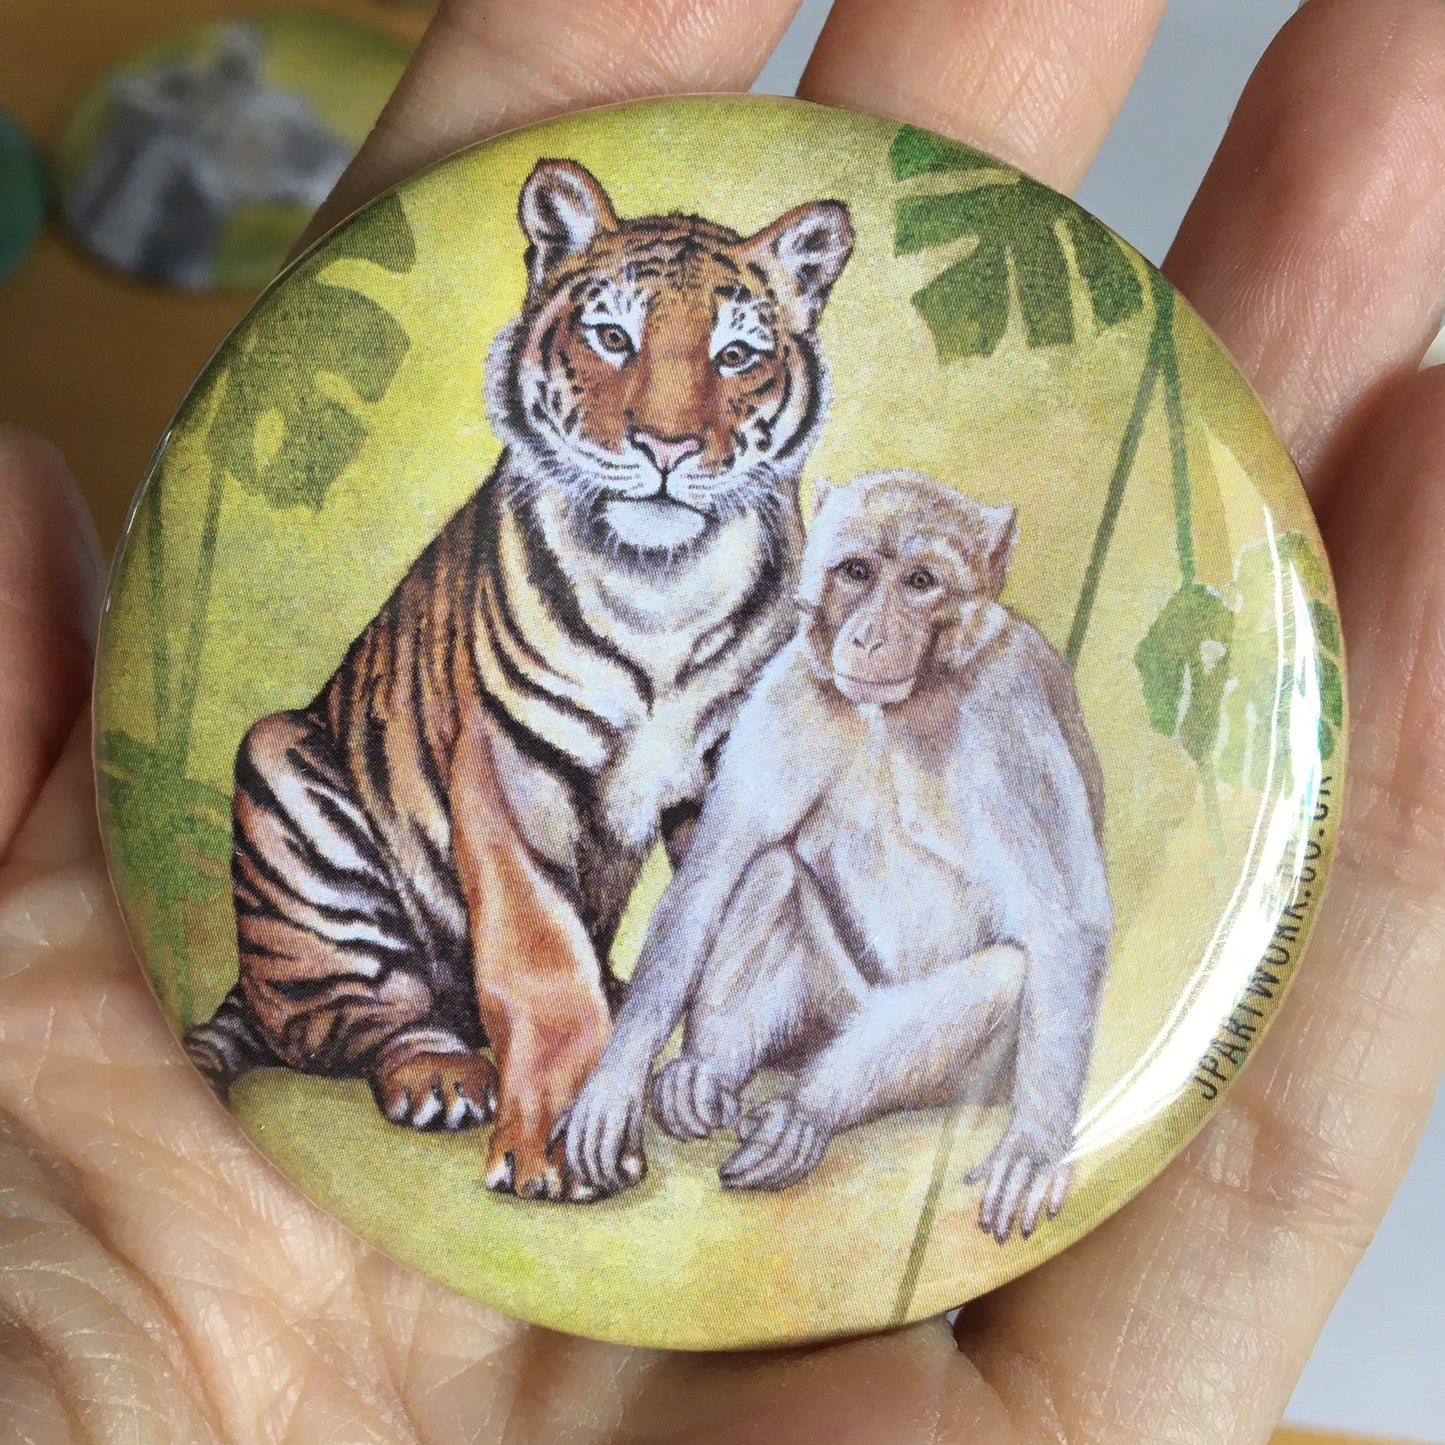 Monkey and Tiger Magnet